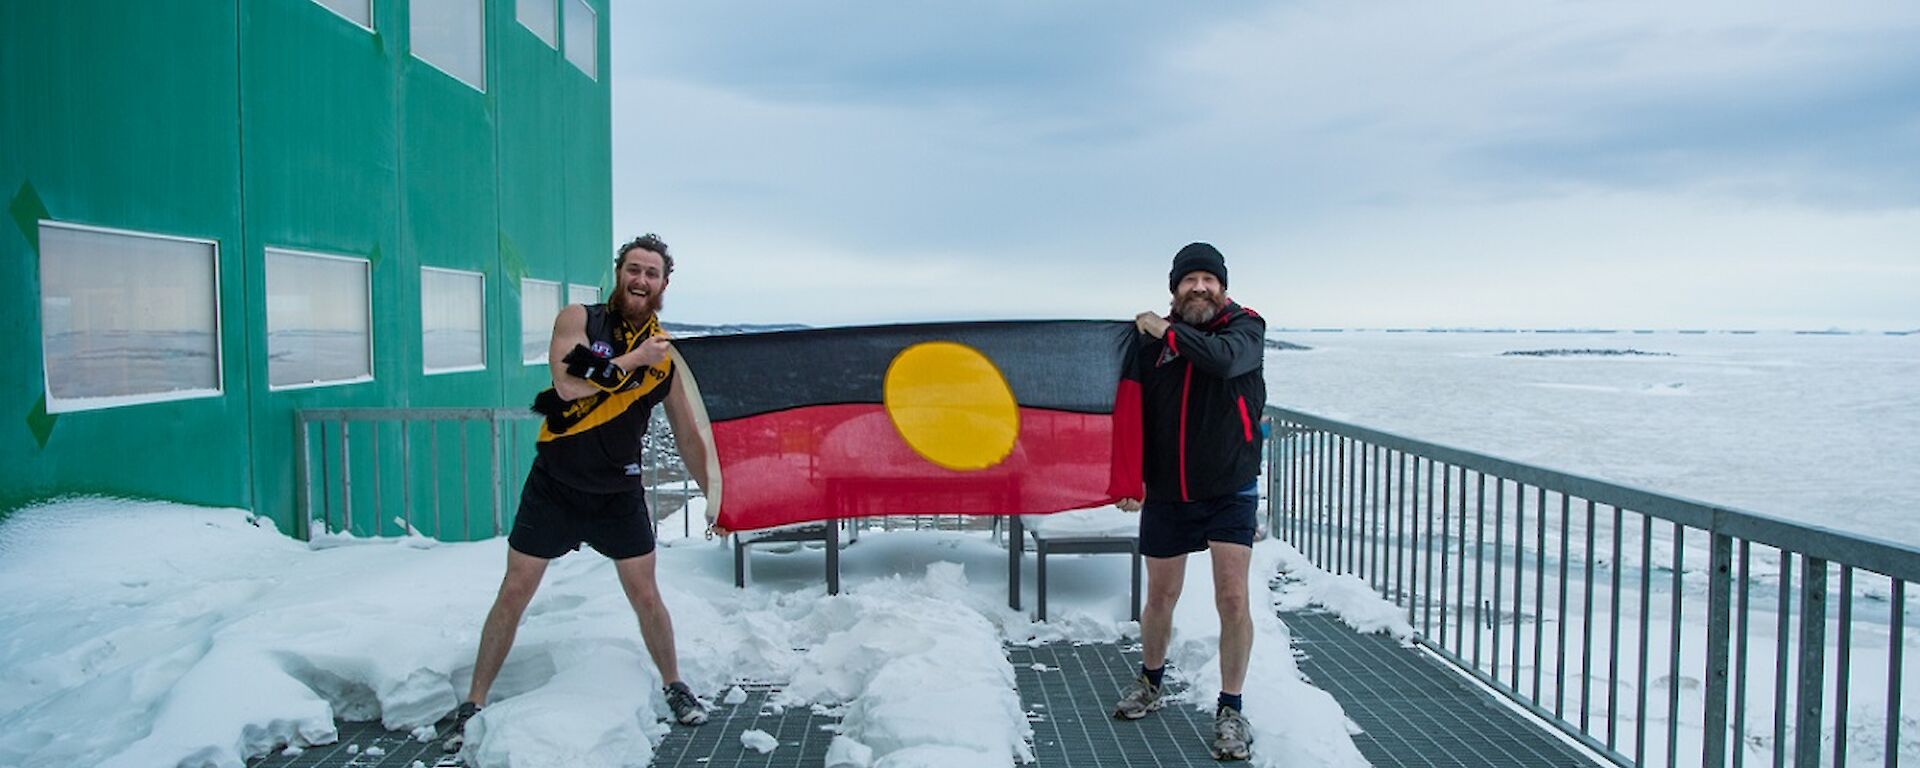 Bryce and Fitzy are holding the aboriginal flag in front on the Living Quarters building. Bryce is in Richmond gear while Fitzy is wearing Essendon gear.